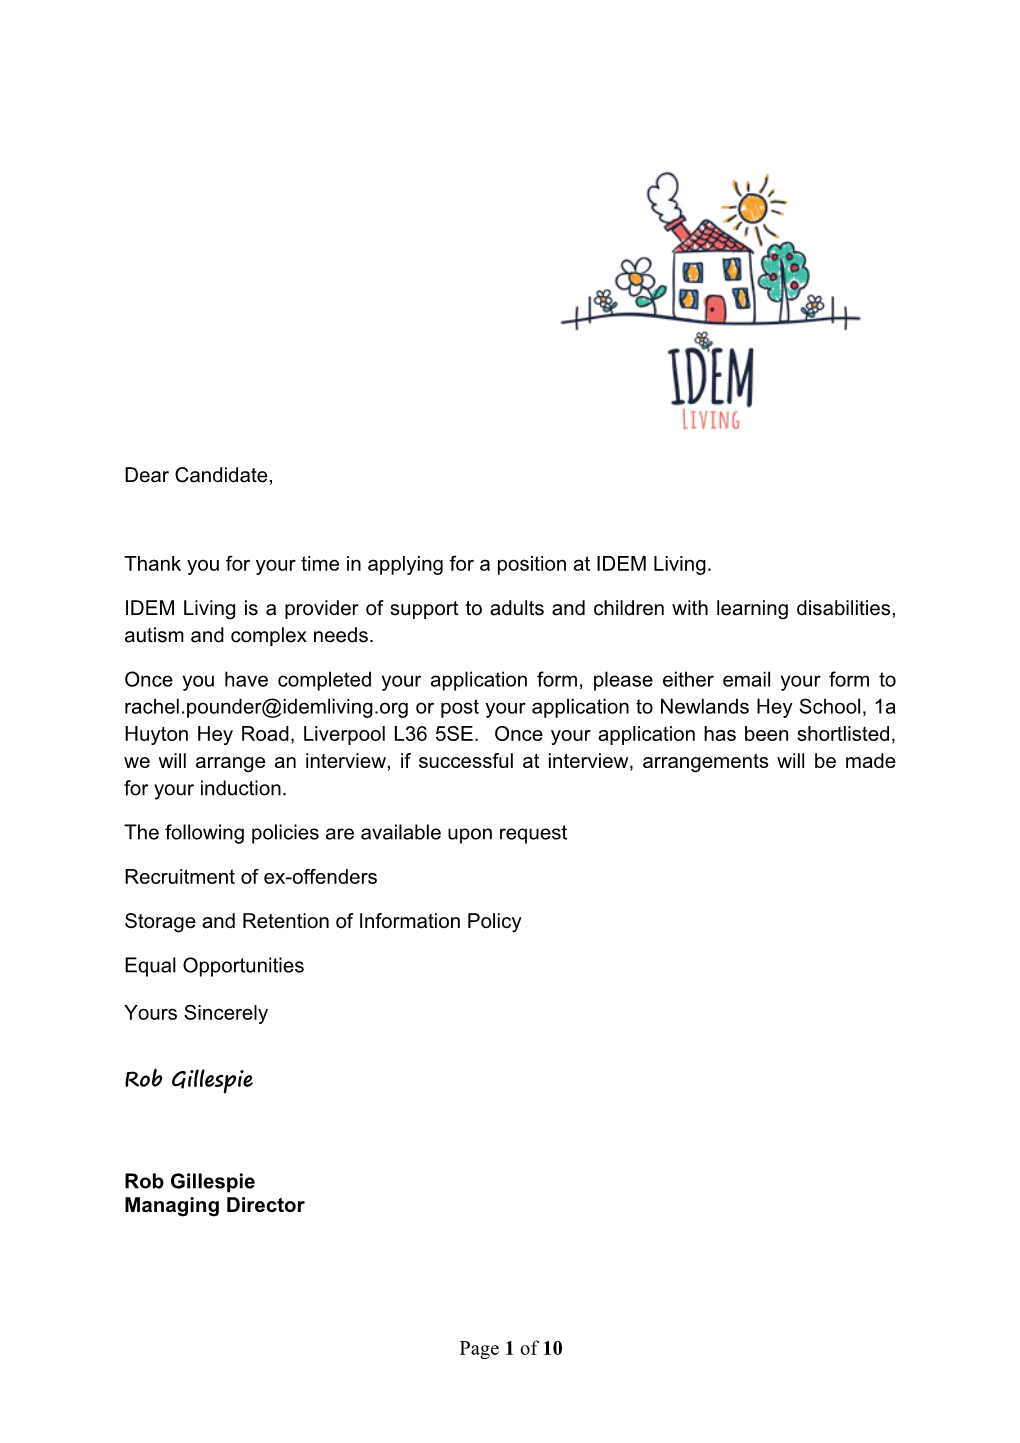 Thank You for Your Time in Applying for a Position at IDEM Living